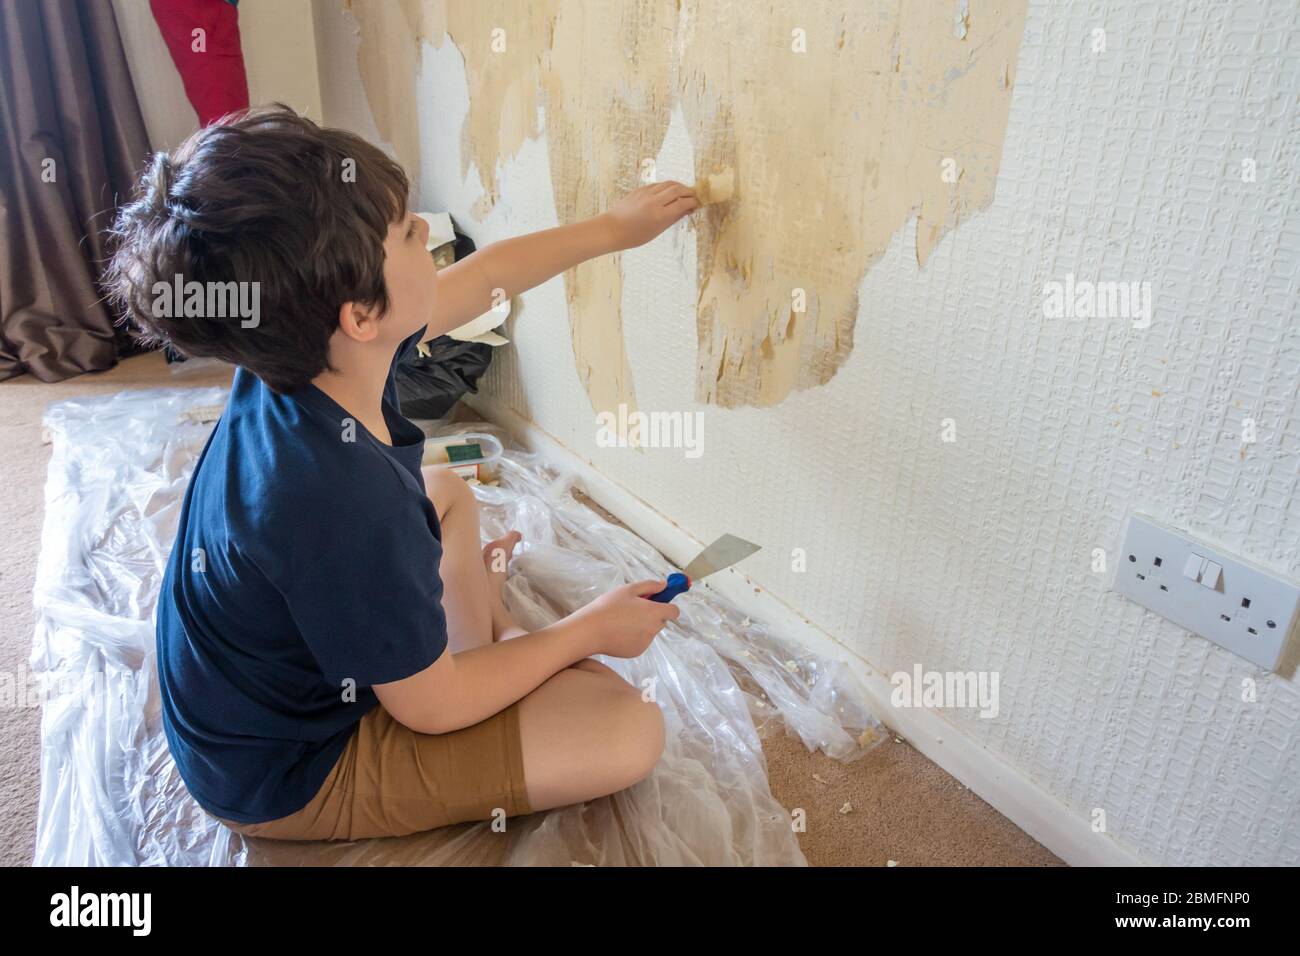 A child helps strip old wallpaper off a wall as the first stage of ...